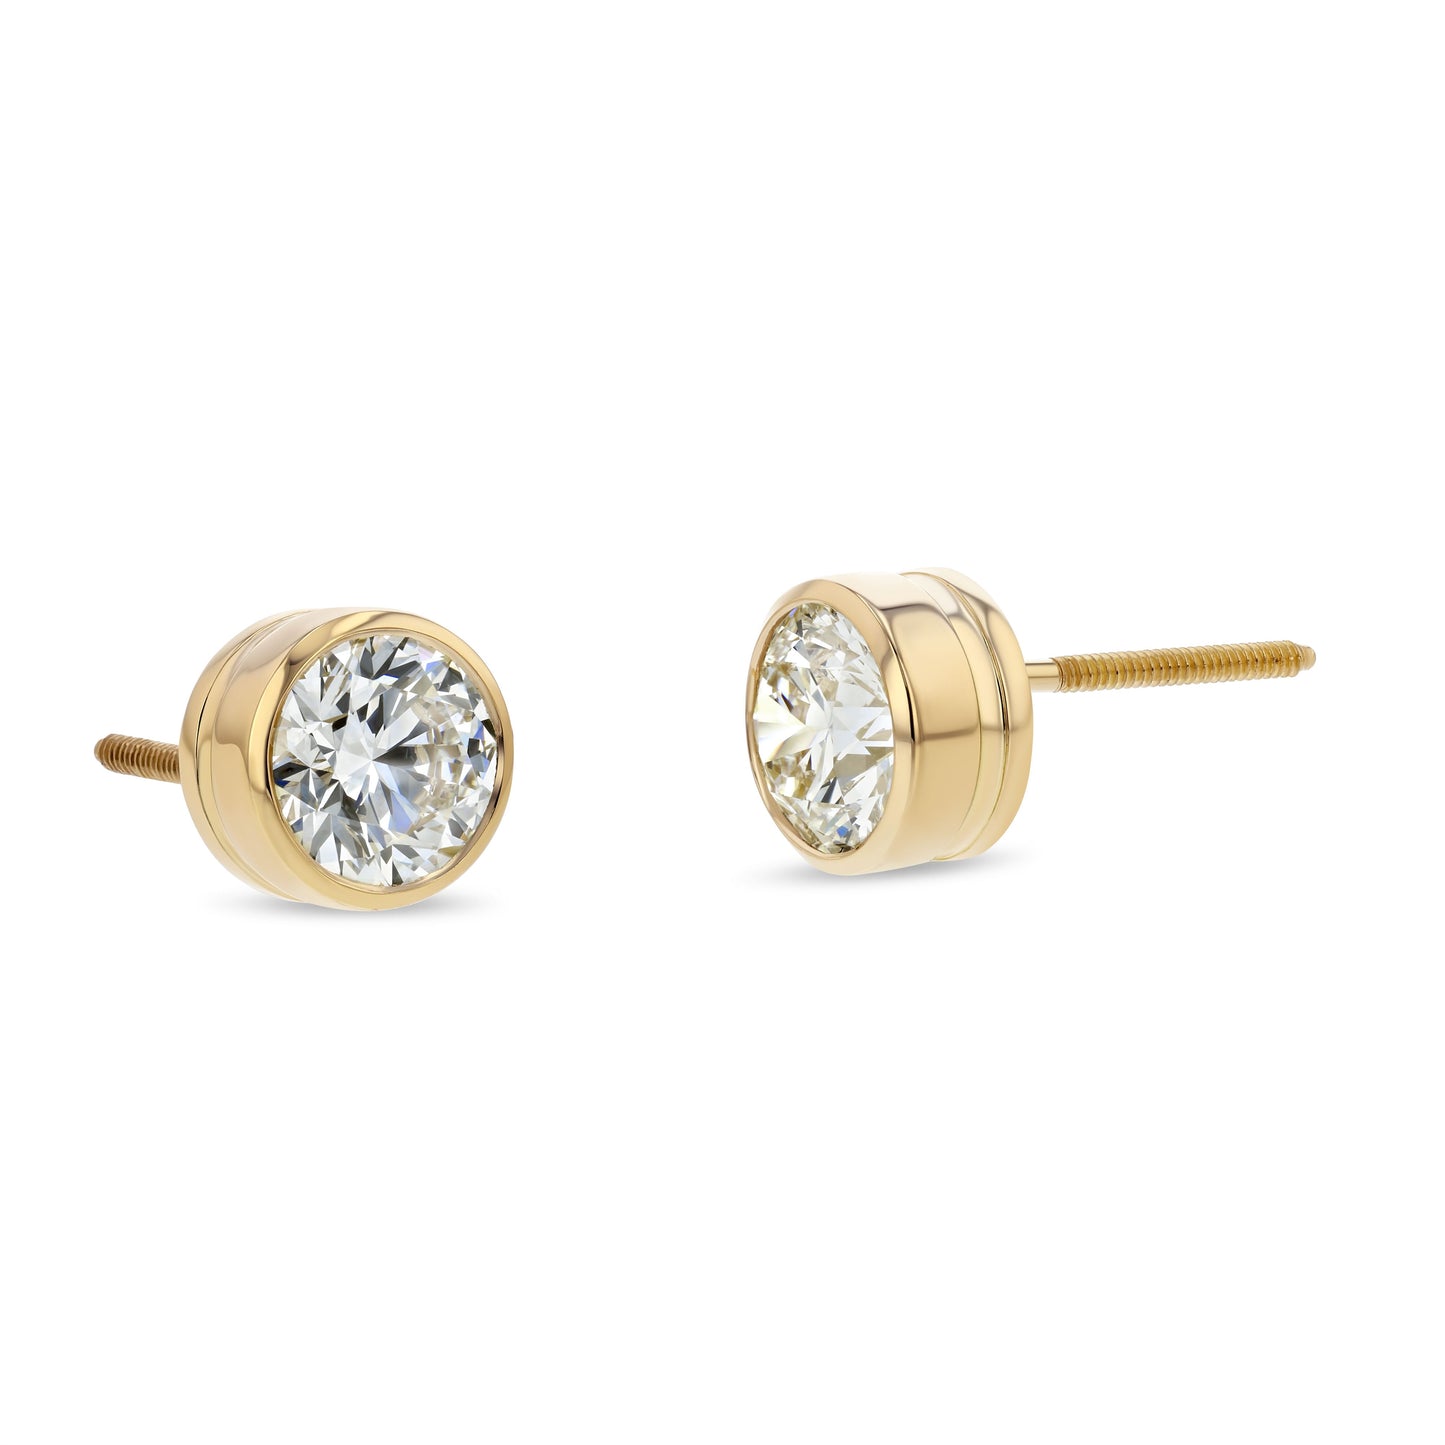 14k Yellow Gold Bezel Round Diamond Stud Earrings 1ctw (5.2mm Ea), G Color, Si3 Clarity